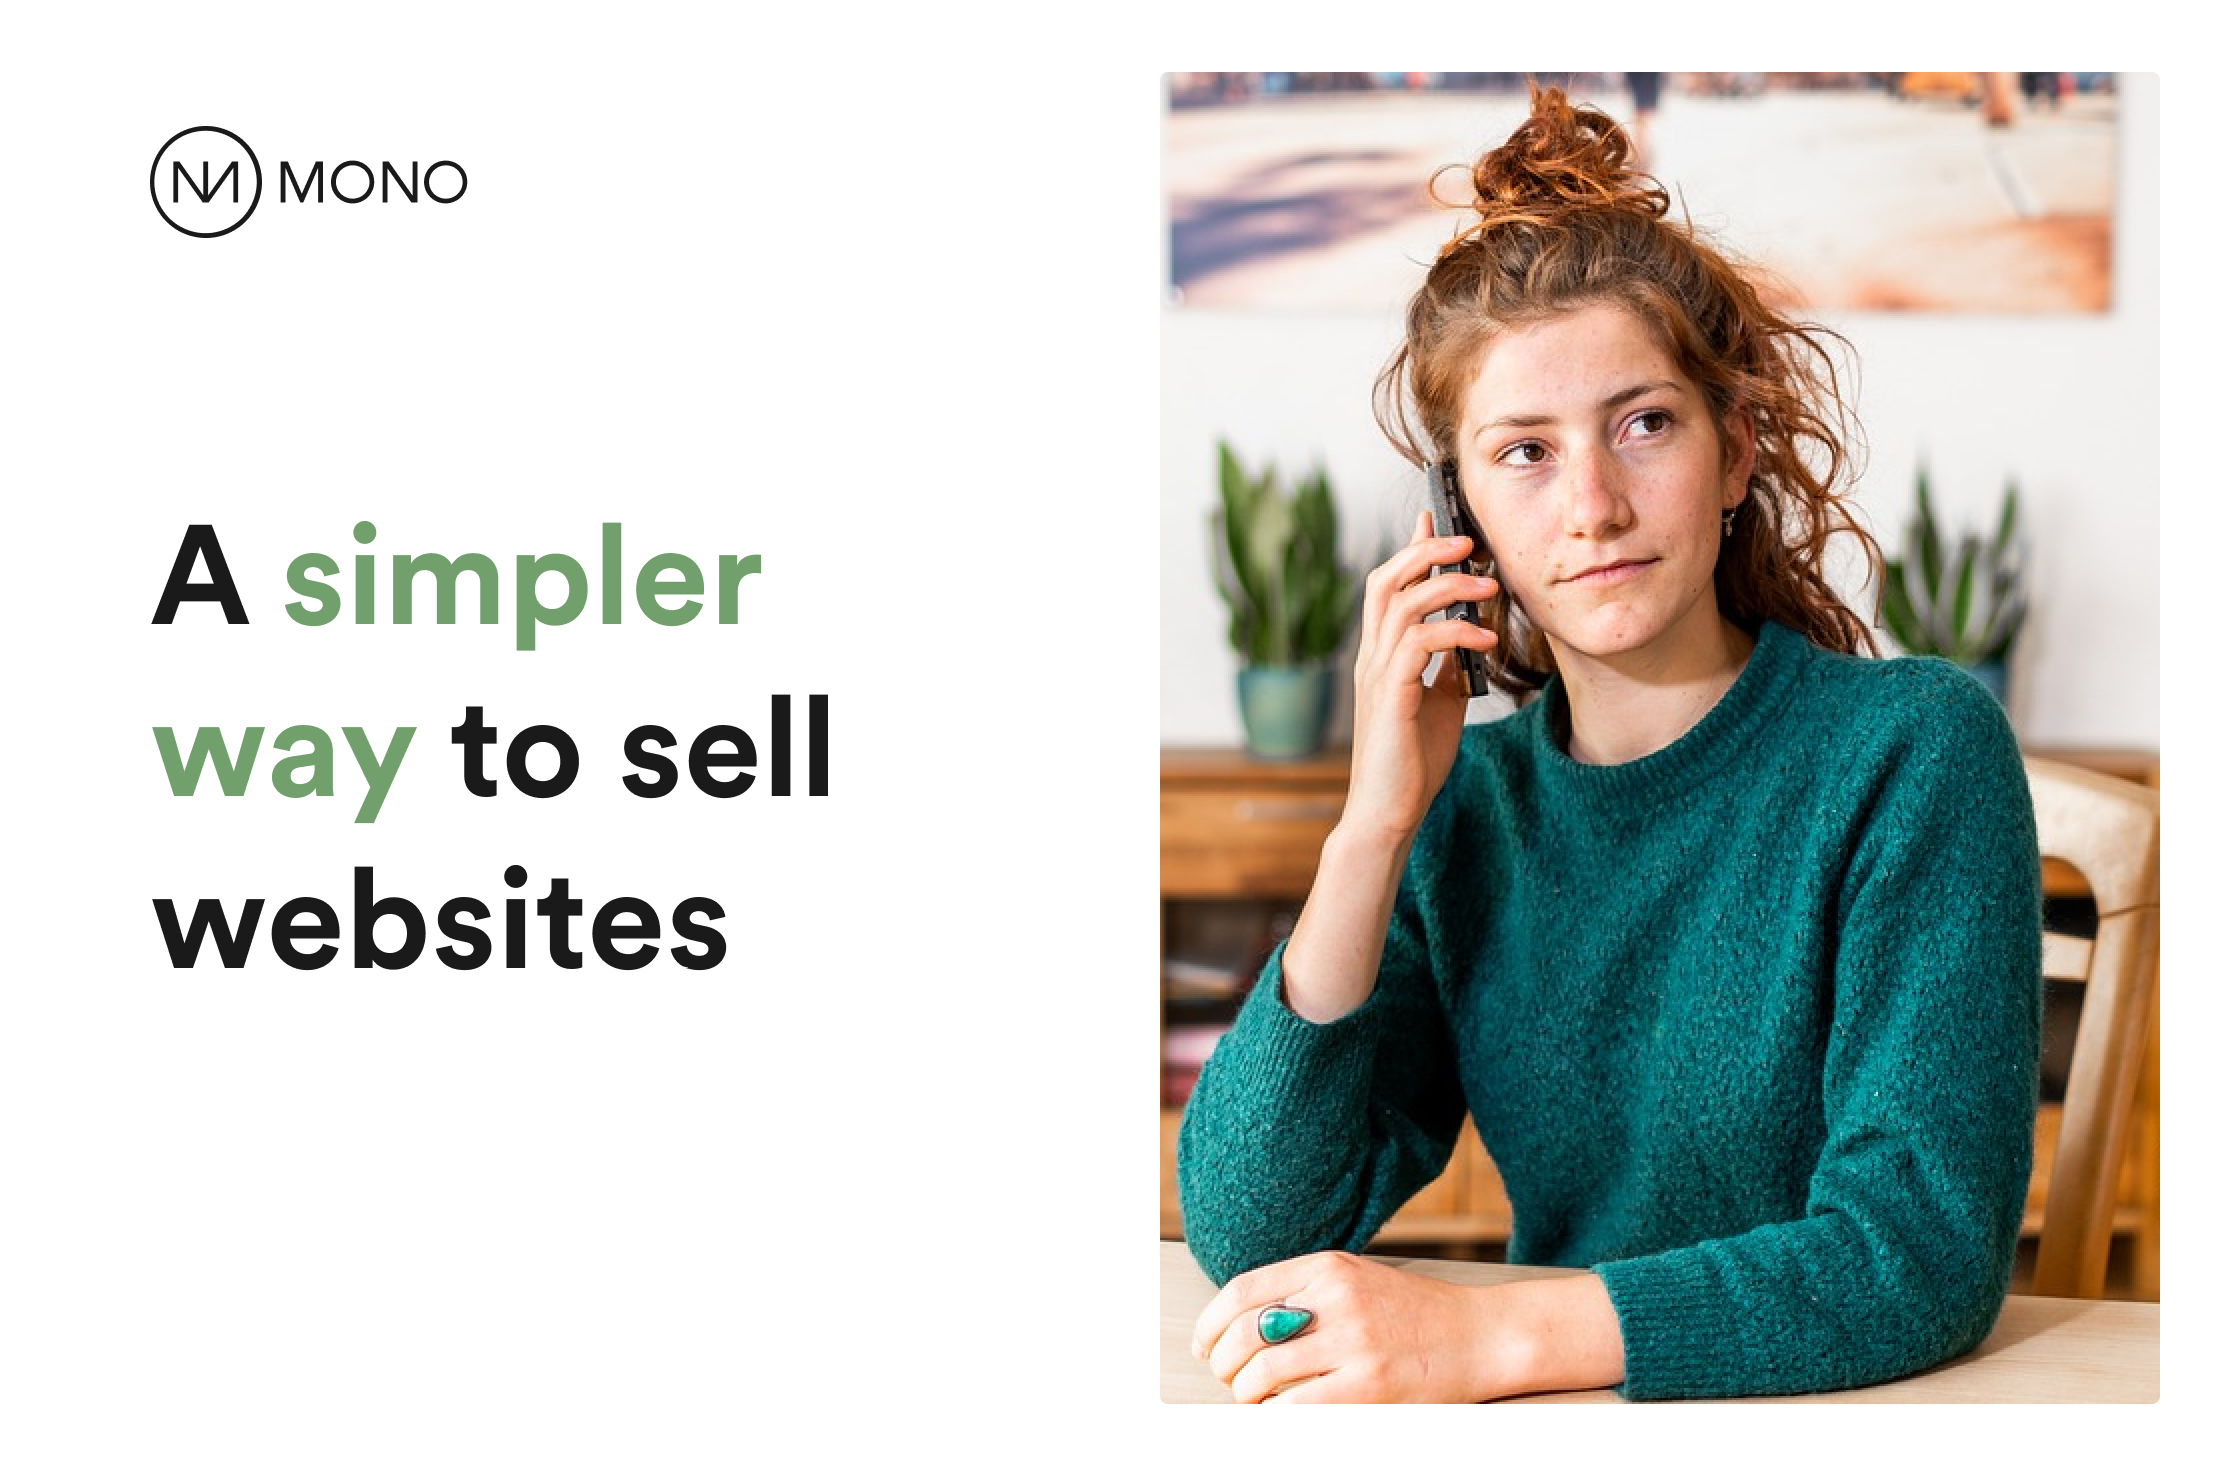 A simpler way to sell websites